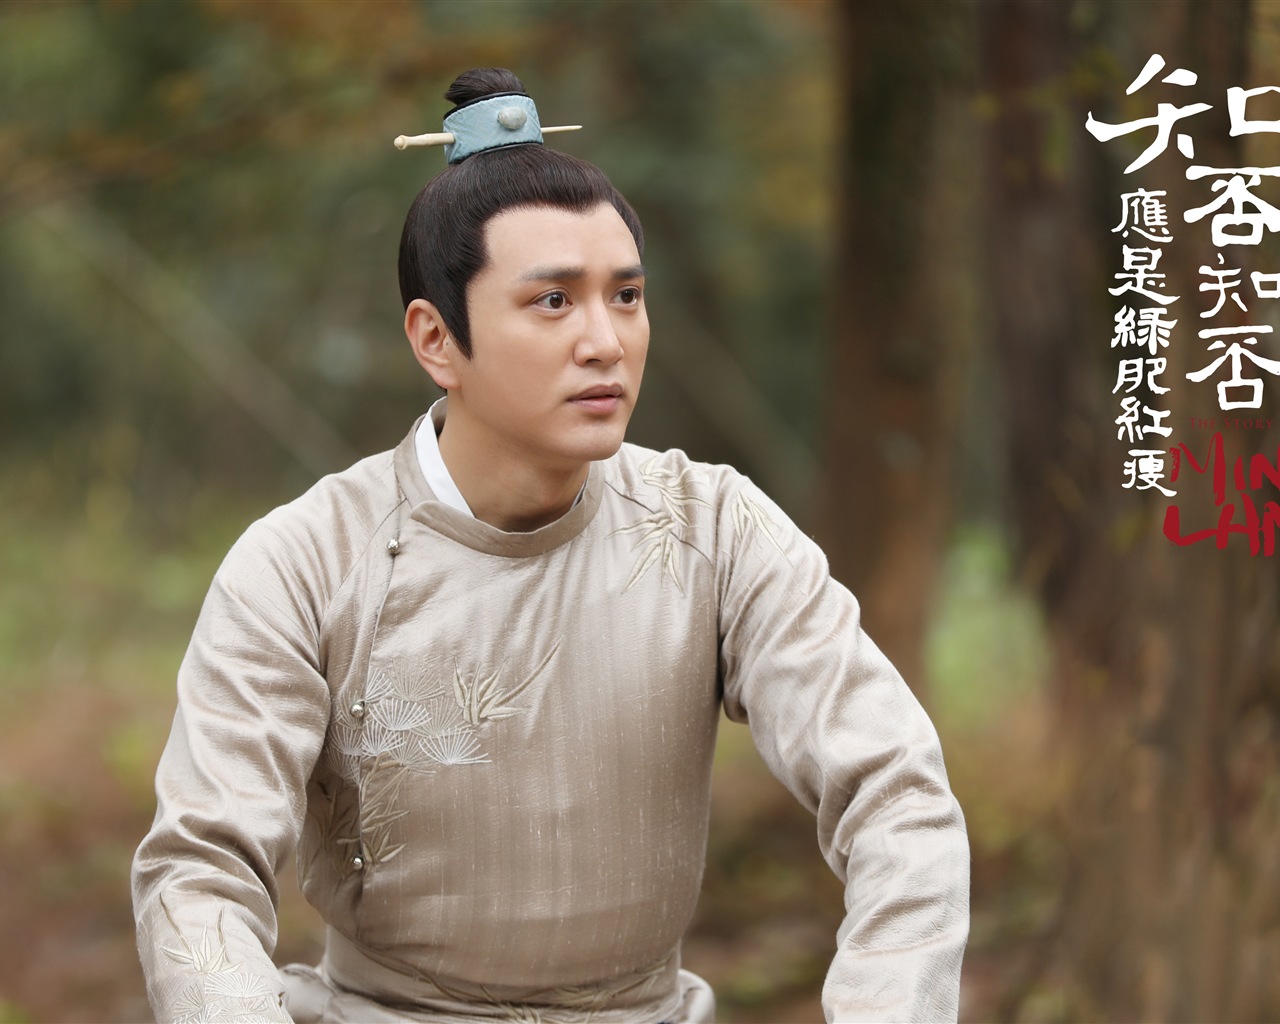 The Story Of MingLan, TV series HD wallpapers #9 - 1280x1024